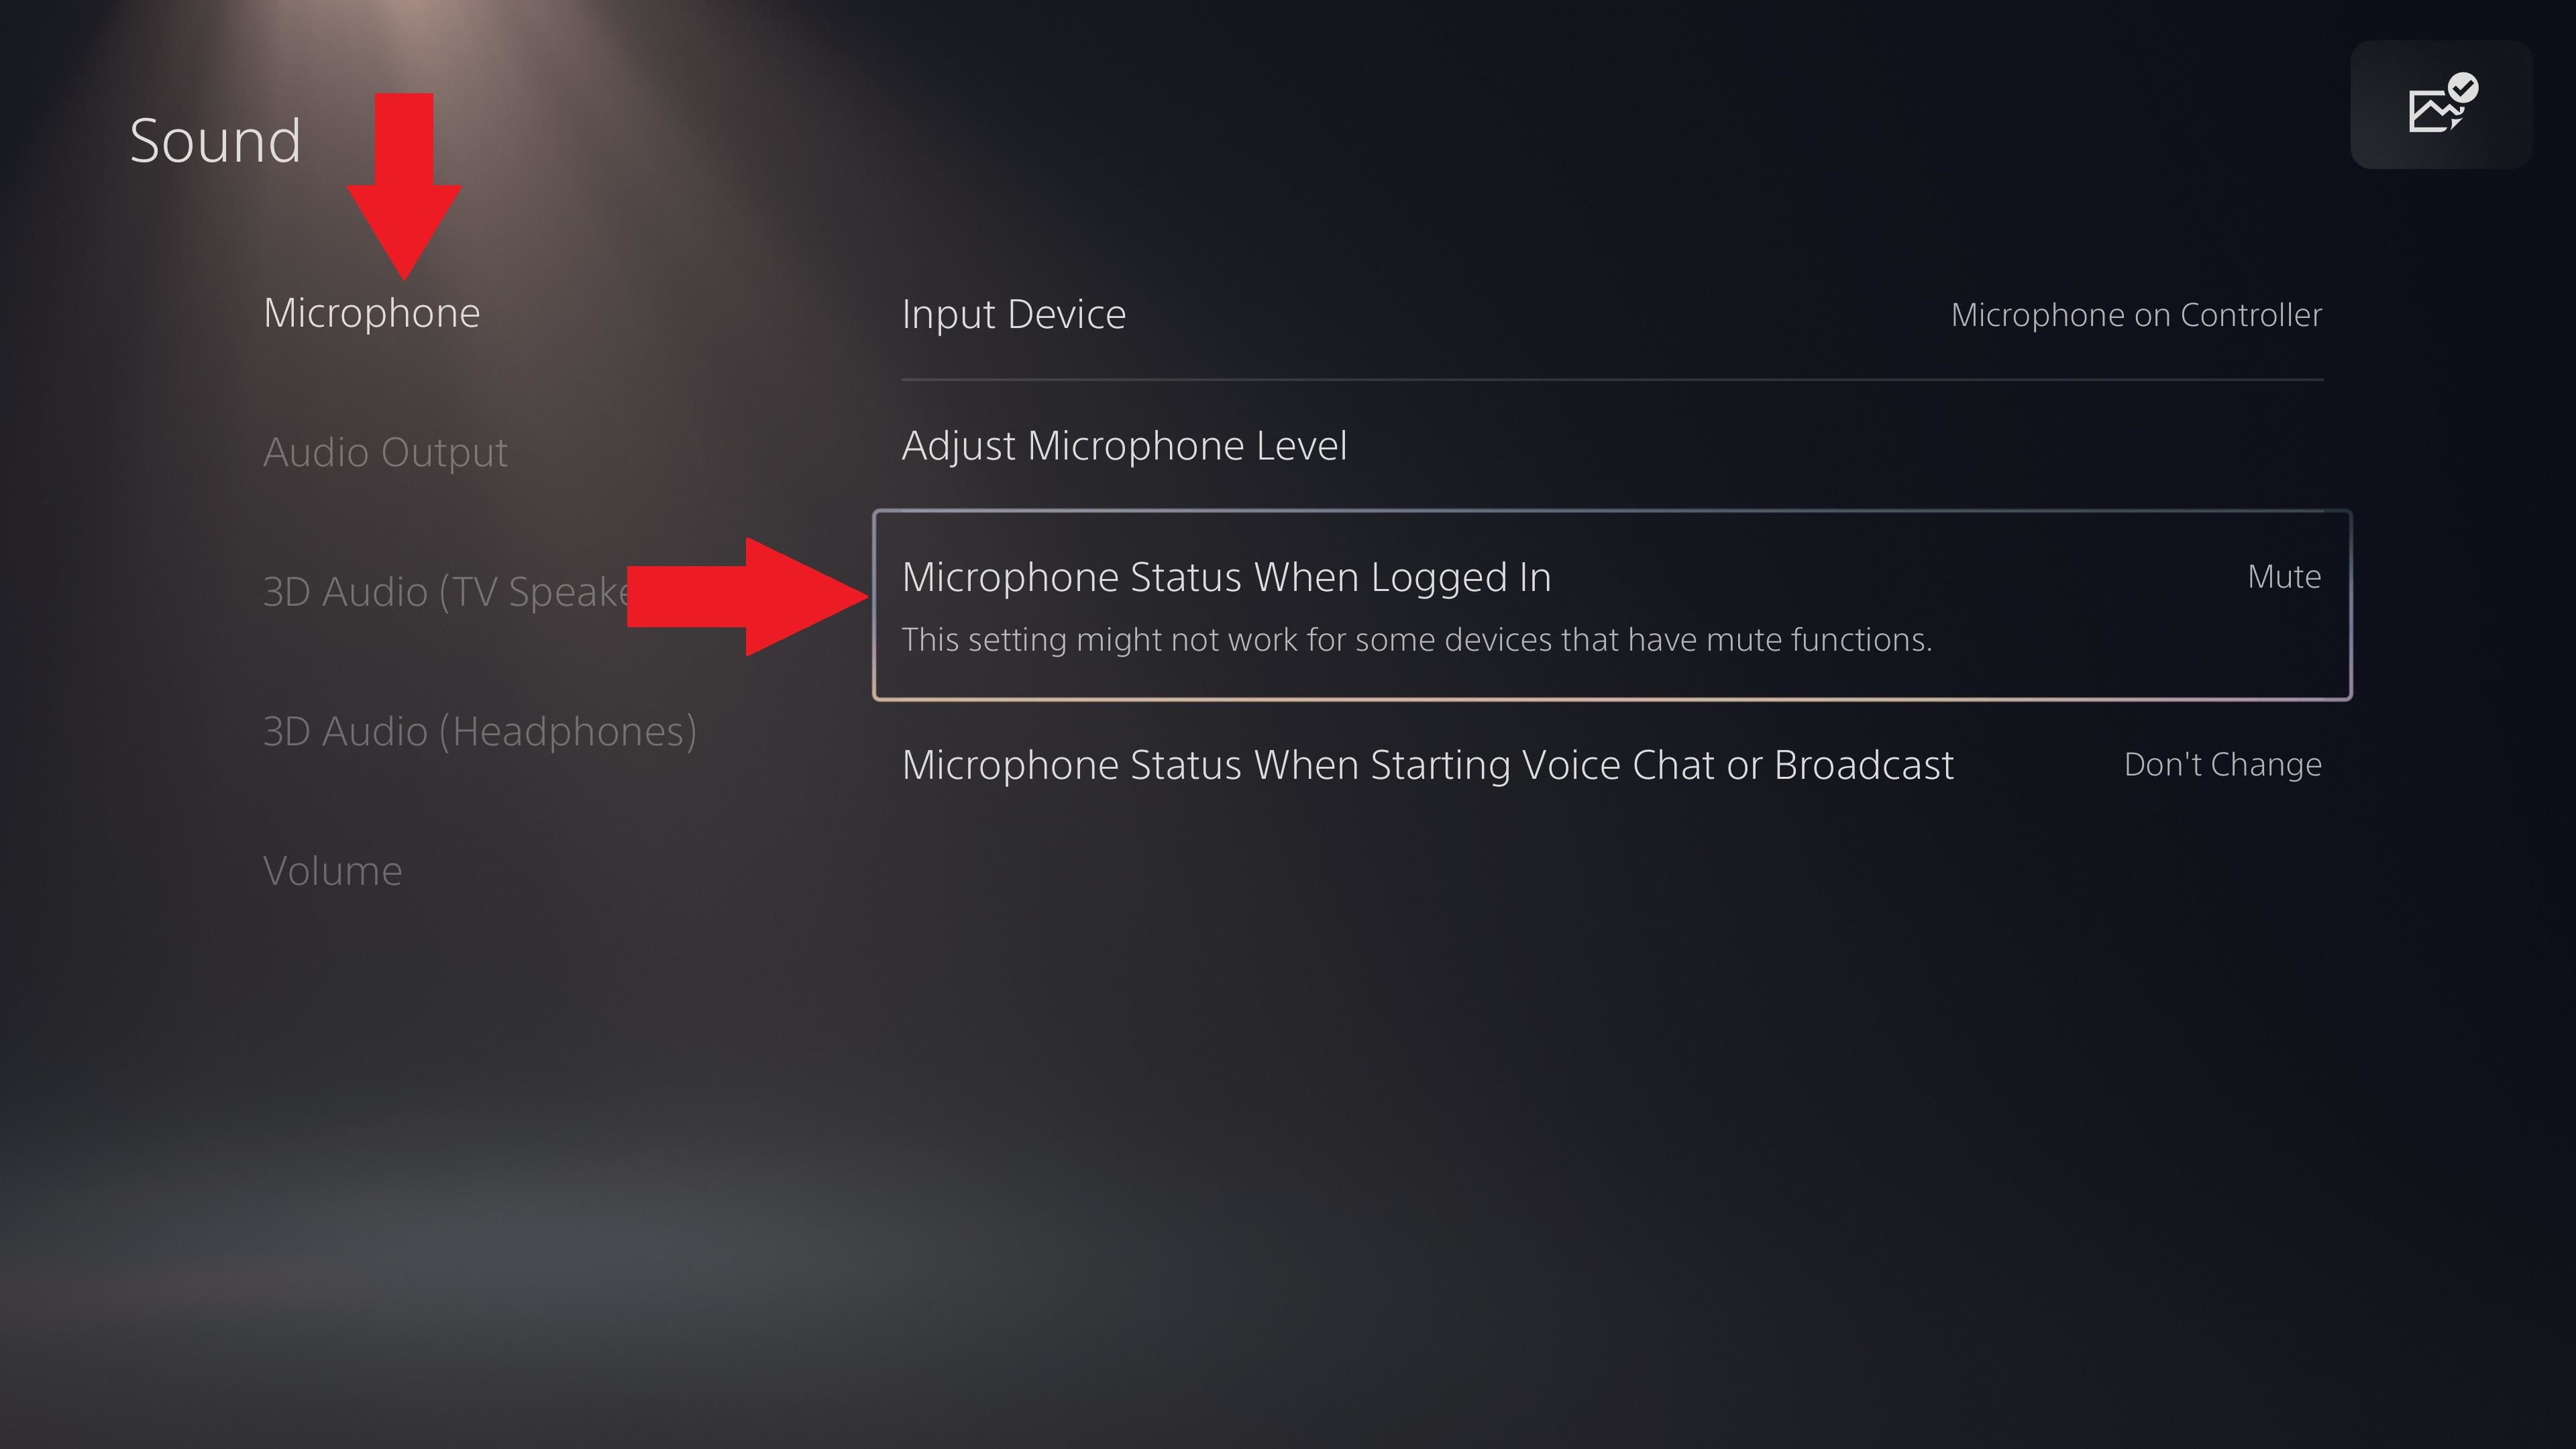 The auto mute setting in the PS5's sound settings.